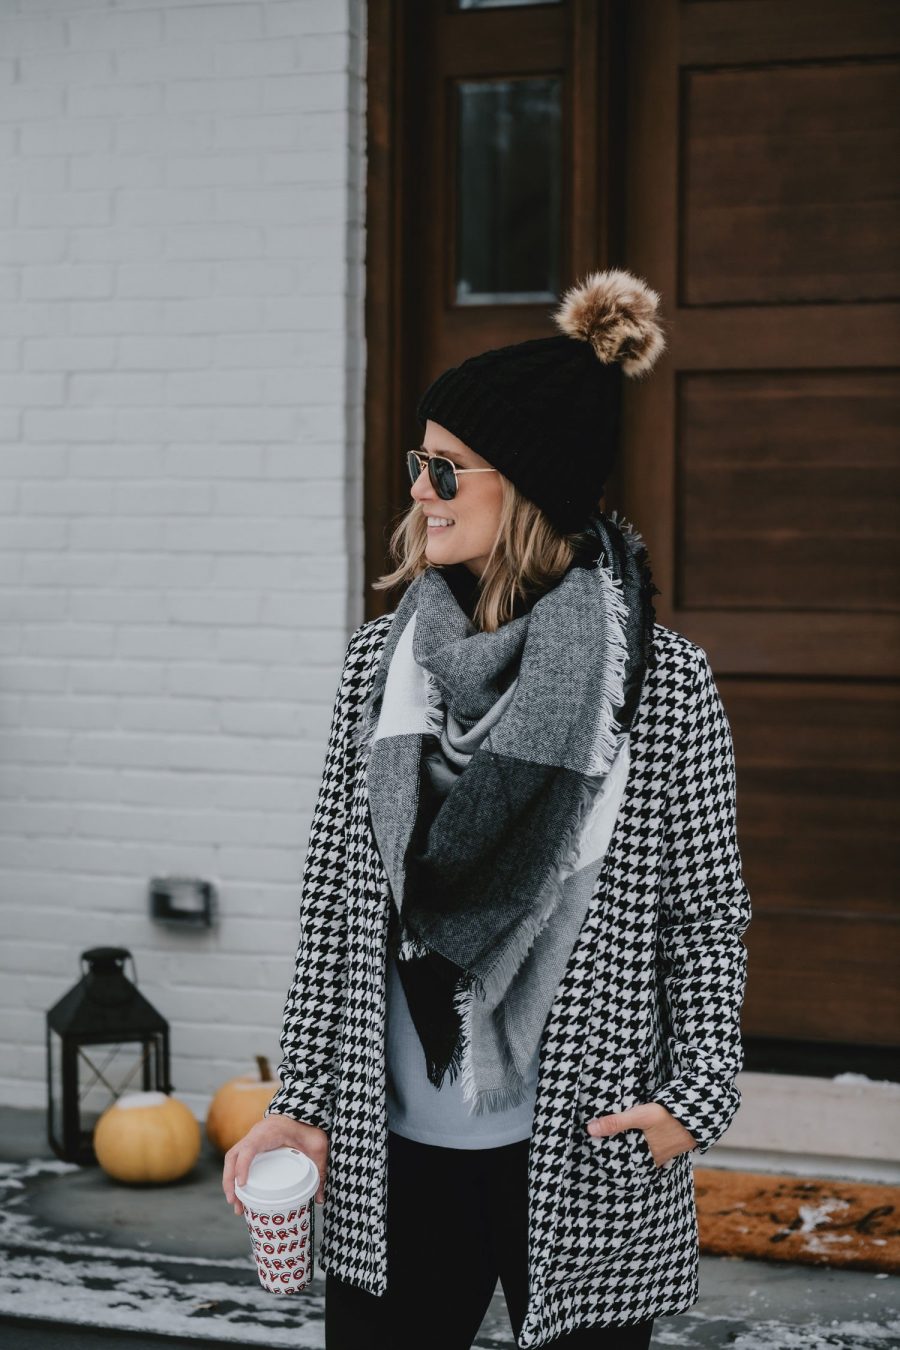 Thanksgiving outfit ideas: Suzanne wearing a houndstooth jacket, plaid scarf, and black beanie